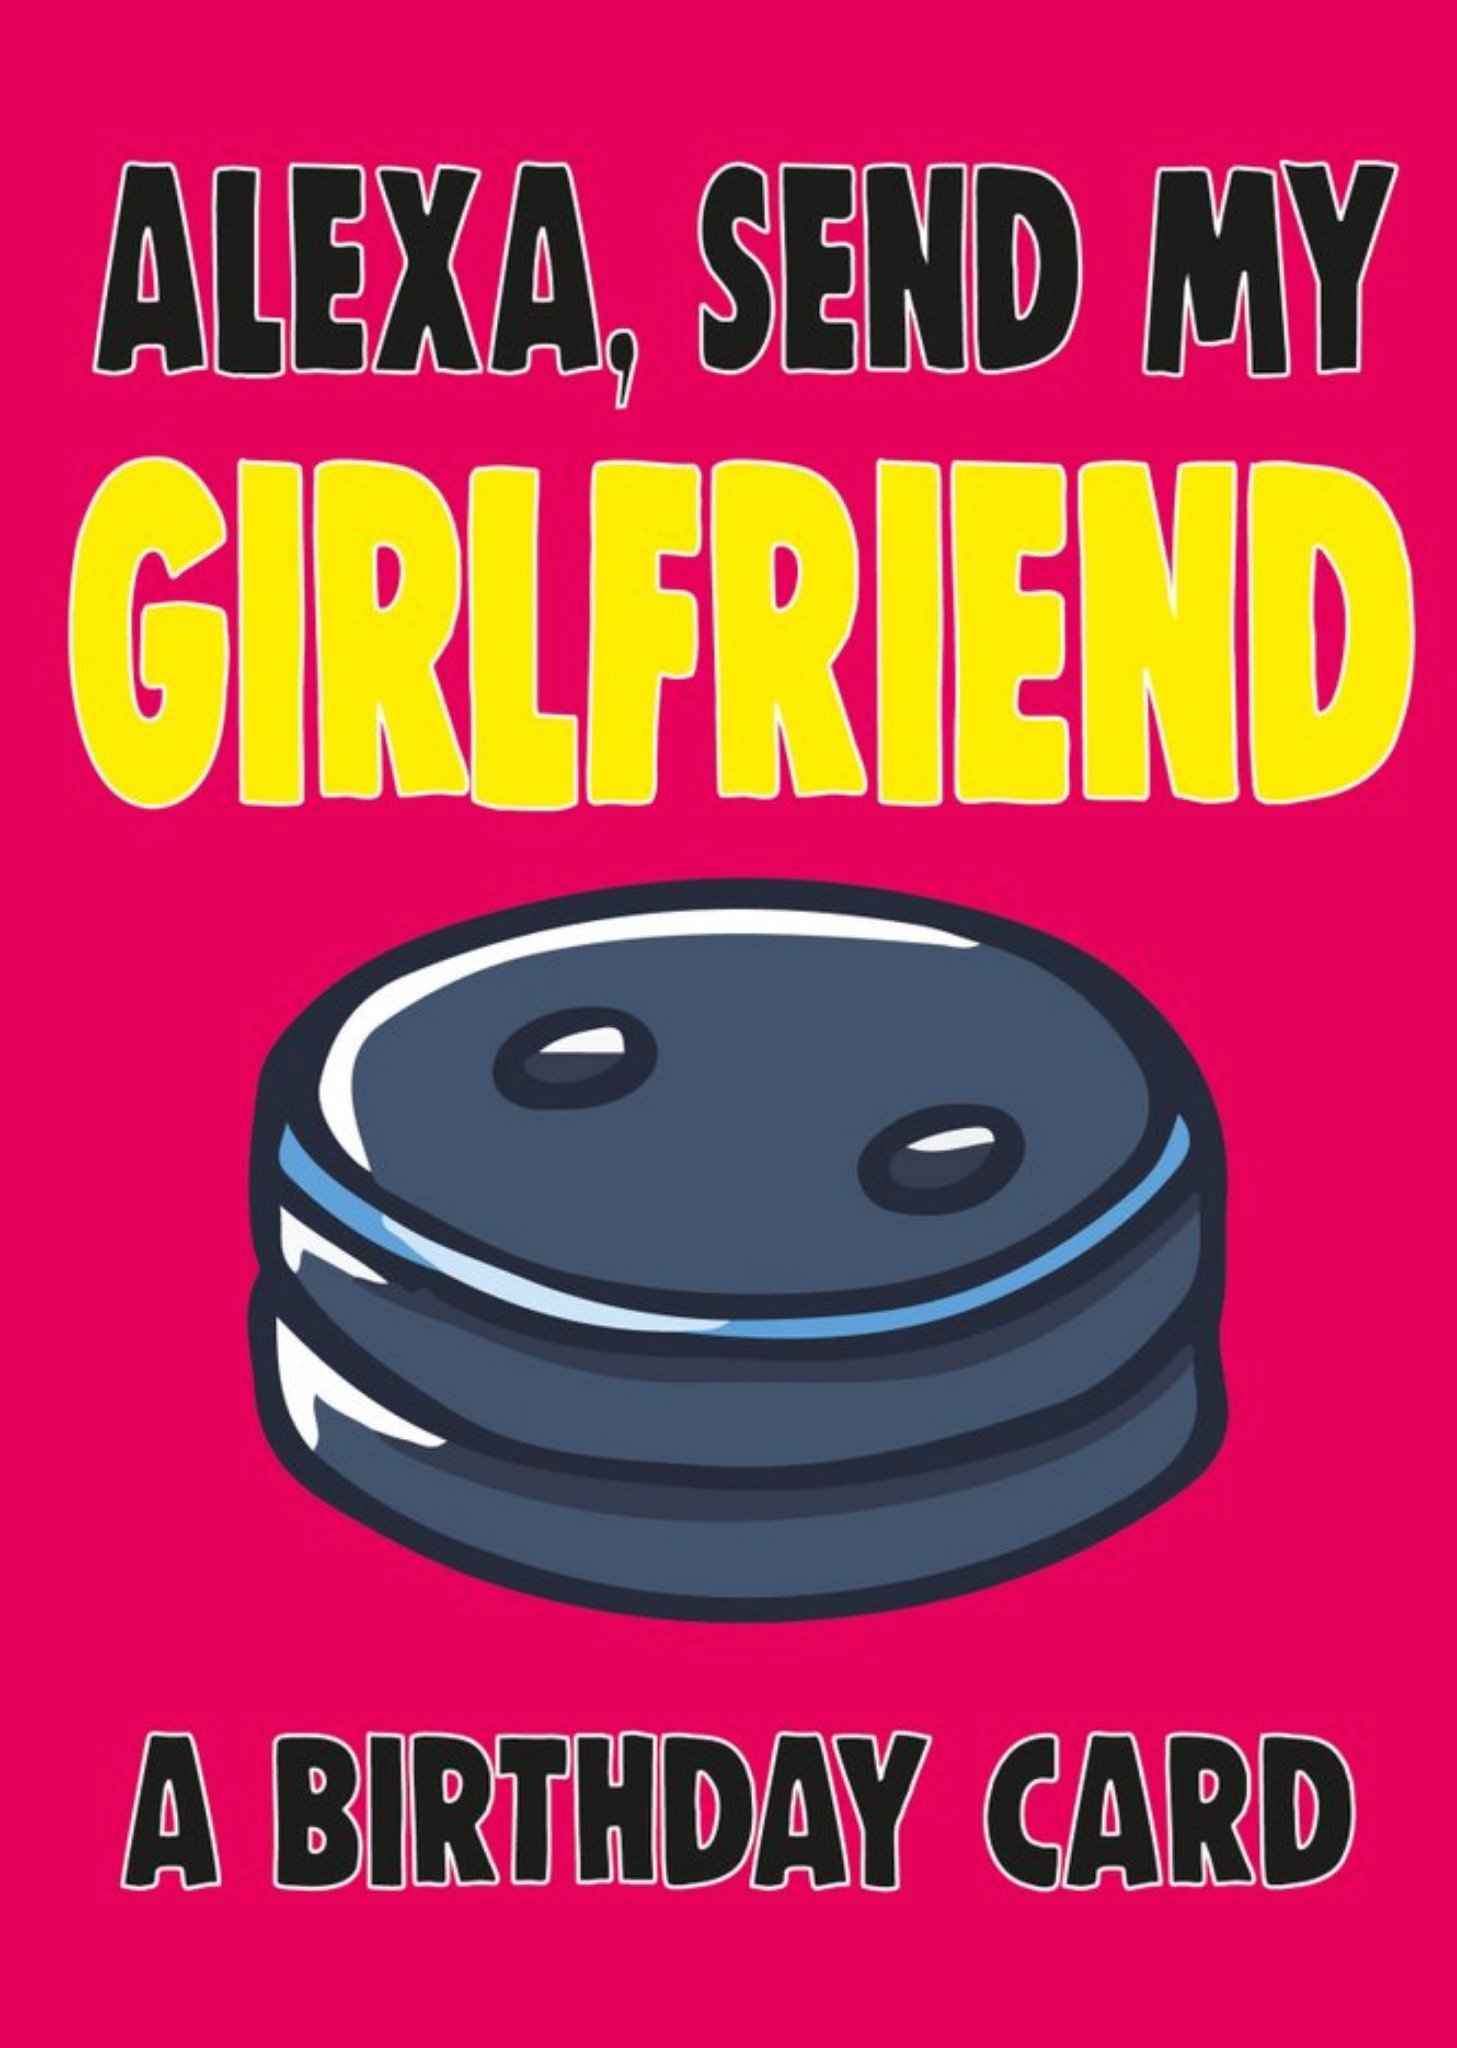 Moonpig Bright Bold Typography With An Illustration Of Alexa Girlfriend Birthday Card, Large